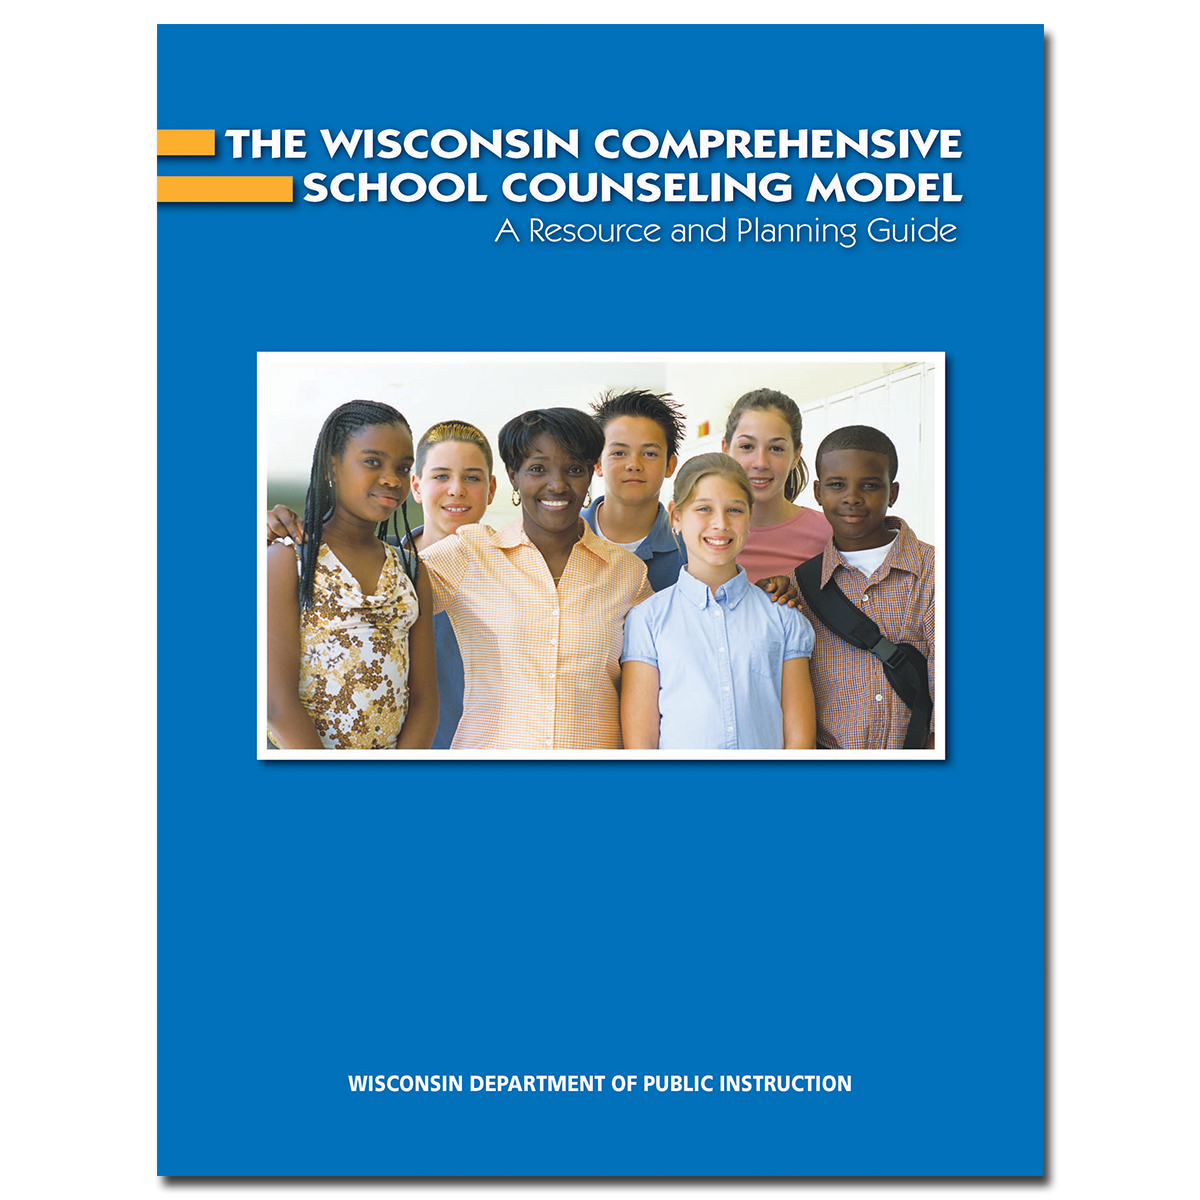 The Wisconsin Comprehensive School Counseling Model: A Resource and